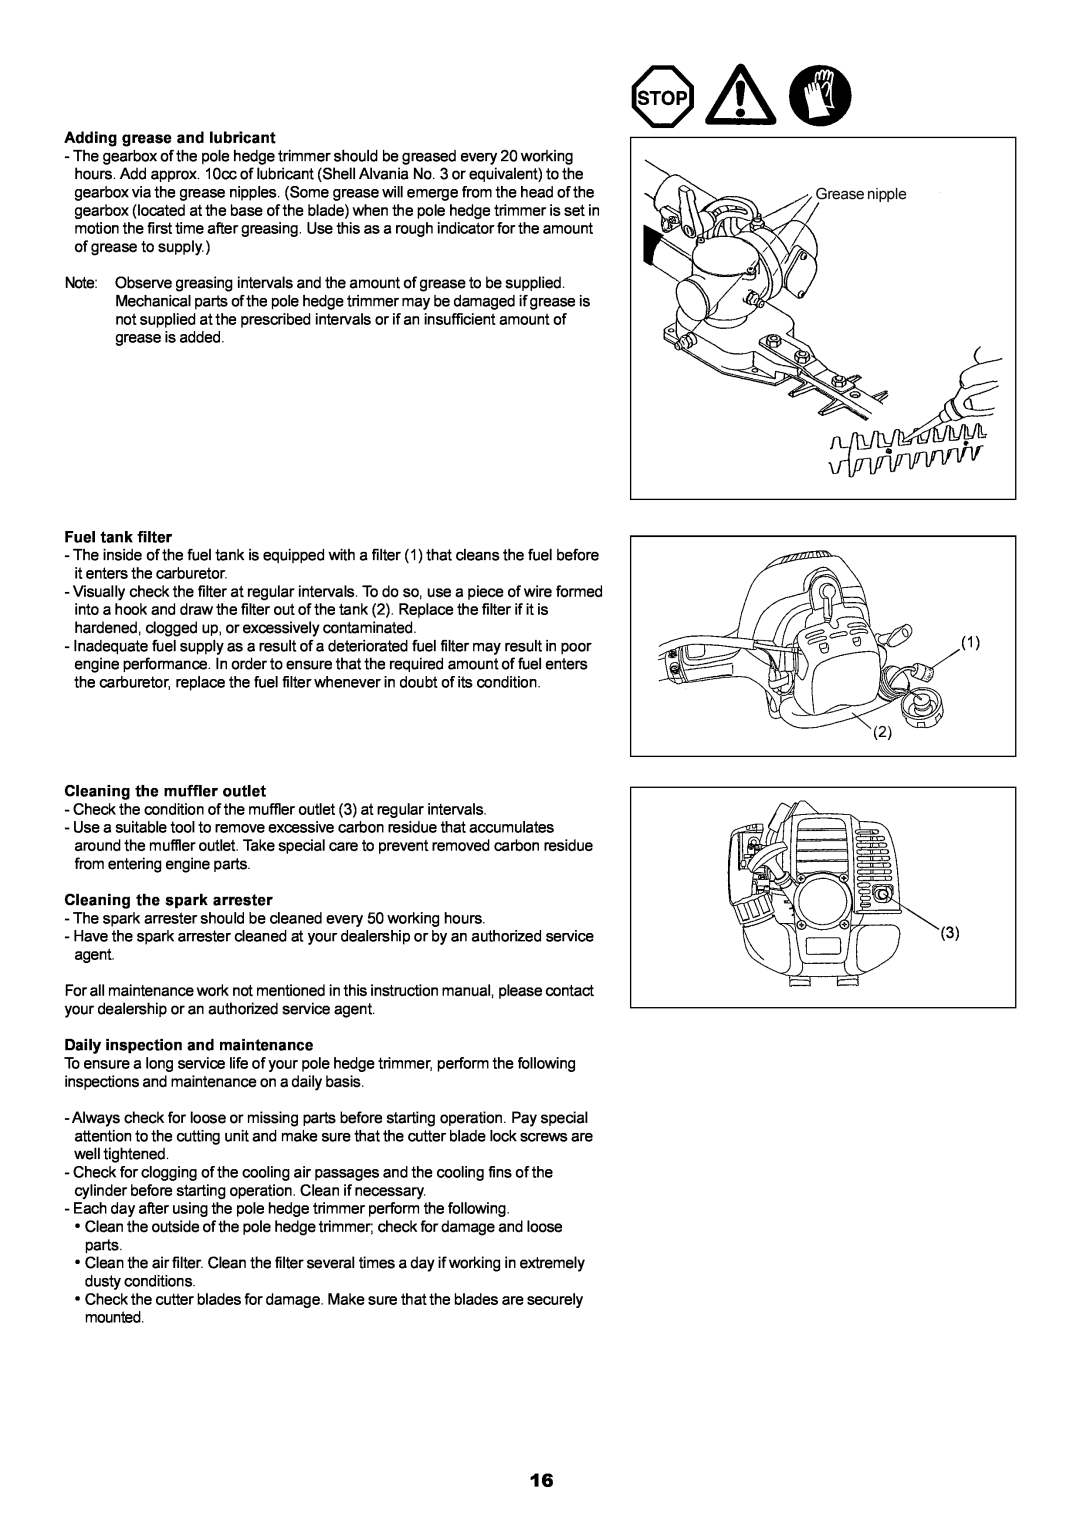 Dolmar MH-2556 instruction manual Adding grease and lubricant 